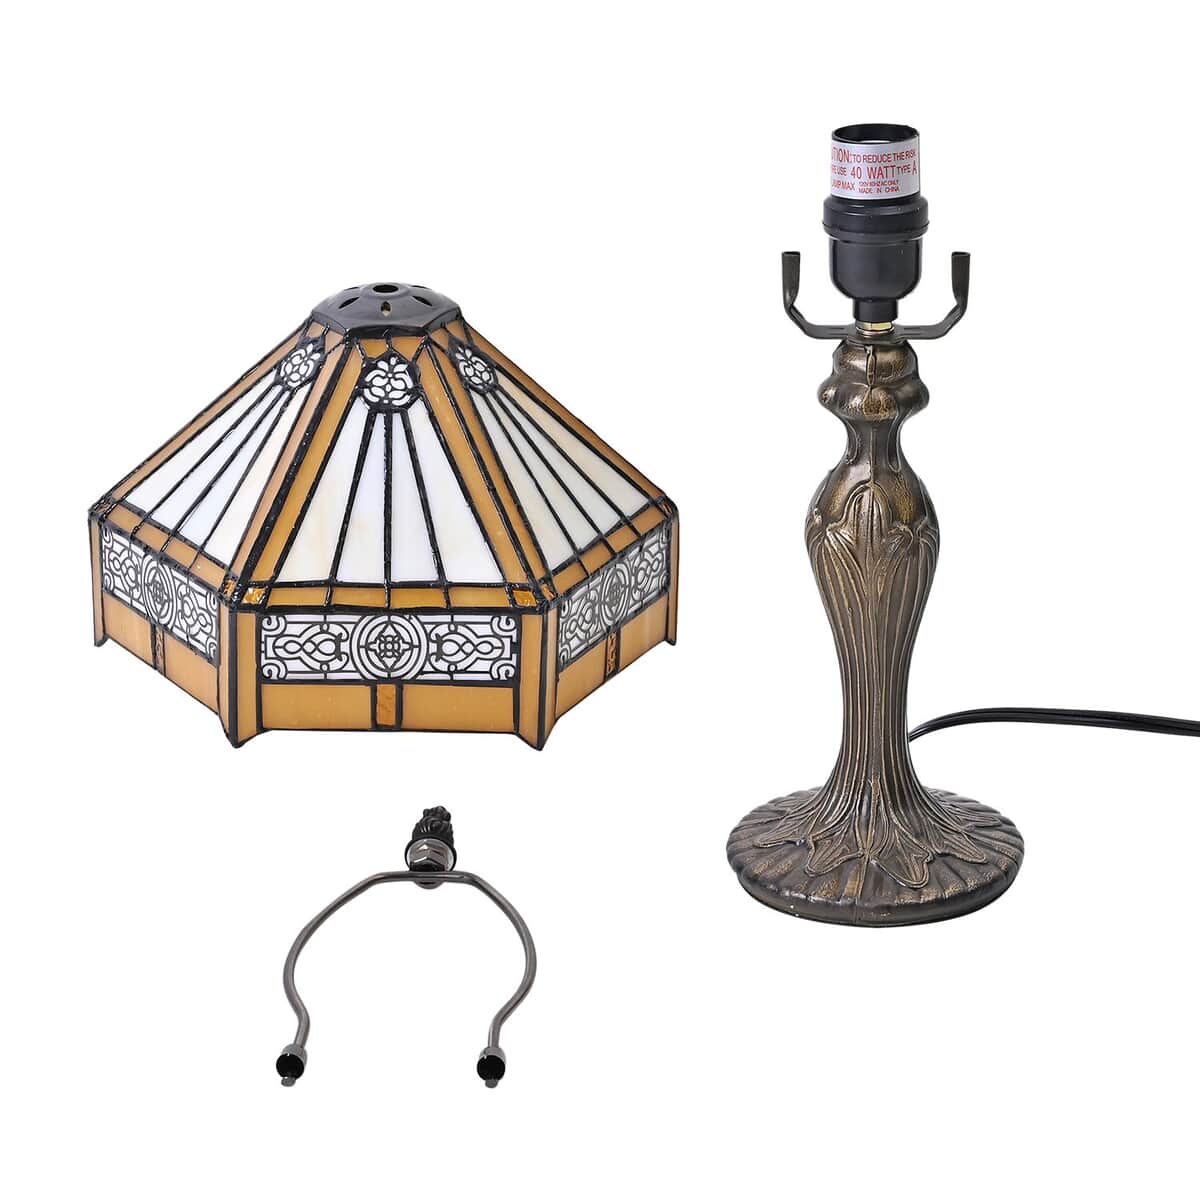 6-Sided Classic Filigree Pattern 10 Inch Tiffany Inspired Table Lamp (E26 Bulb Not Included) image number 3